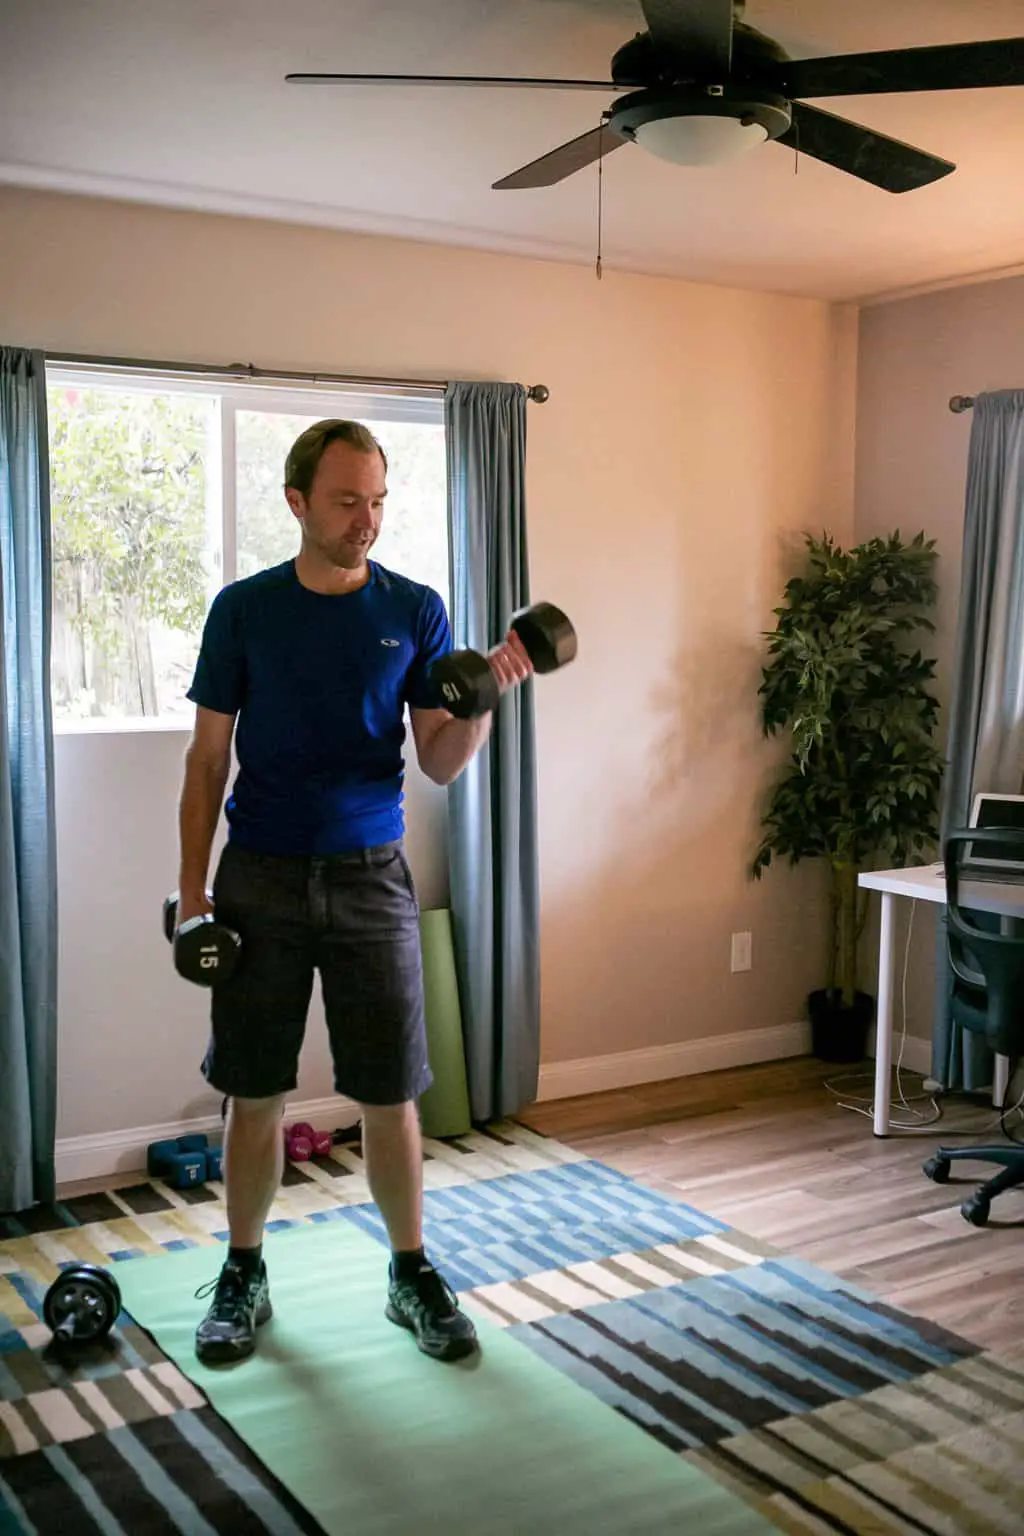 Man doing dumbbell exercises in his room